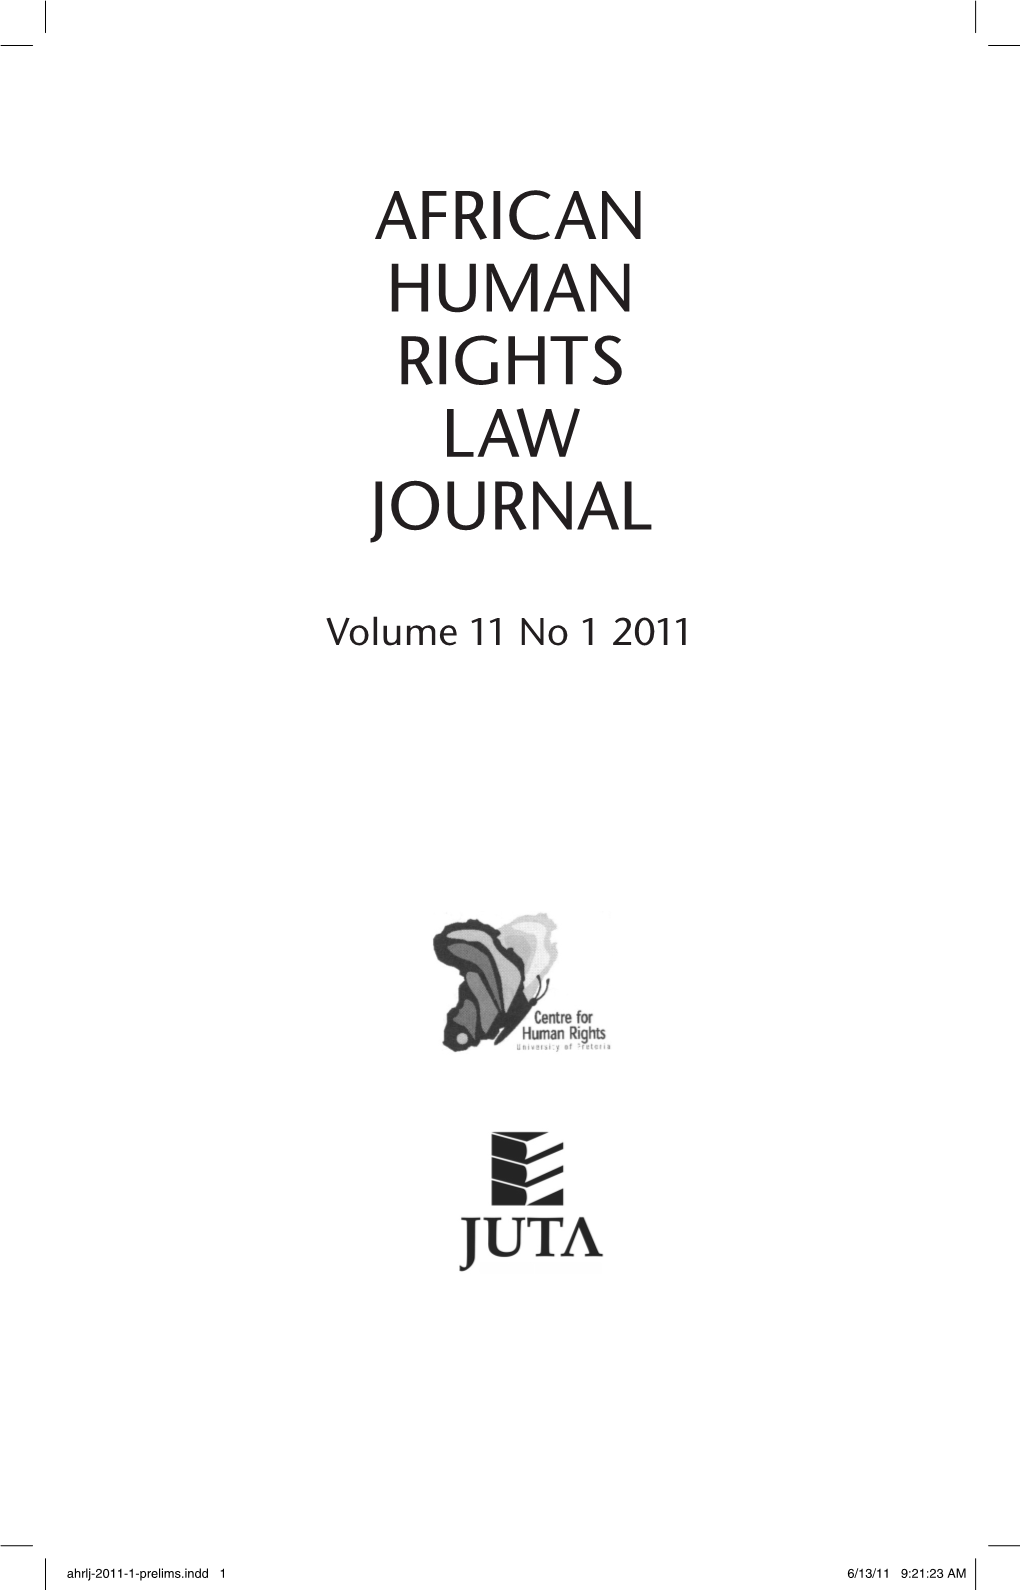 Ukuthwala, ‘Forced Marriage’ and the South African Children’S Act by Lea Mwambene and Julia Sloth-Nielsen